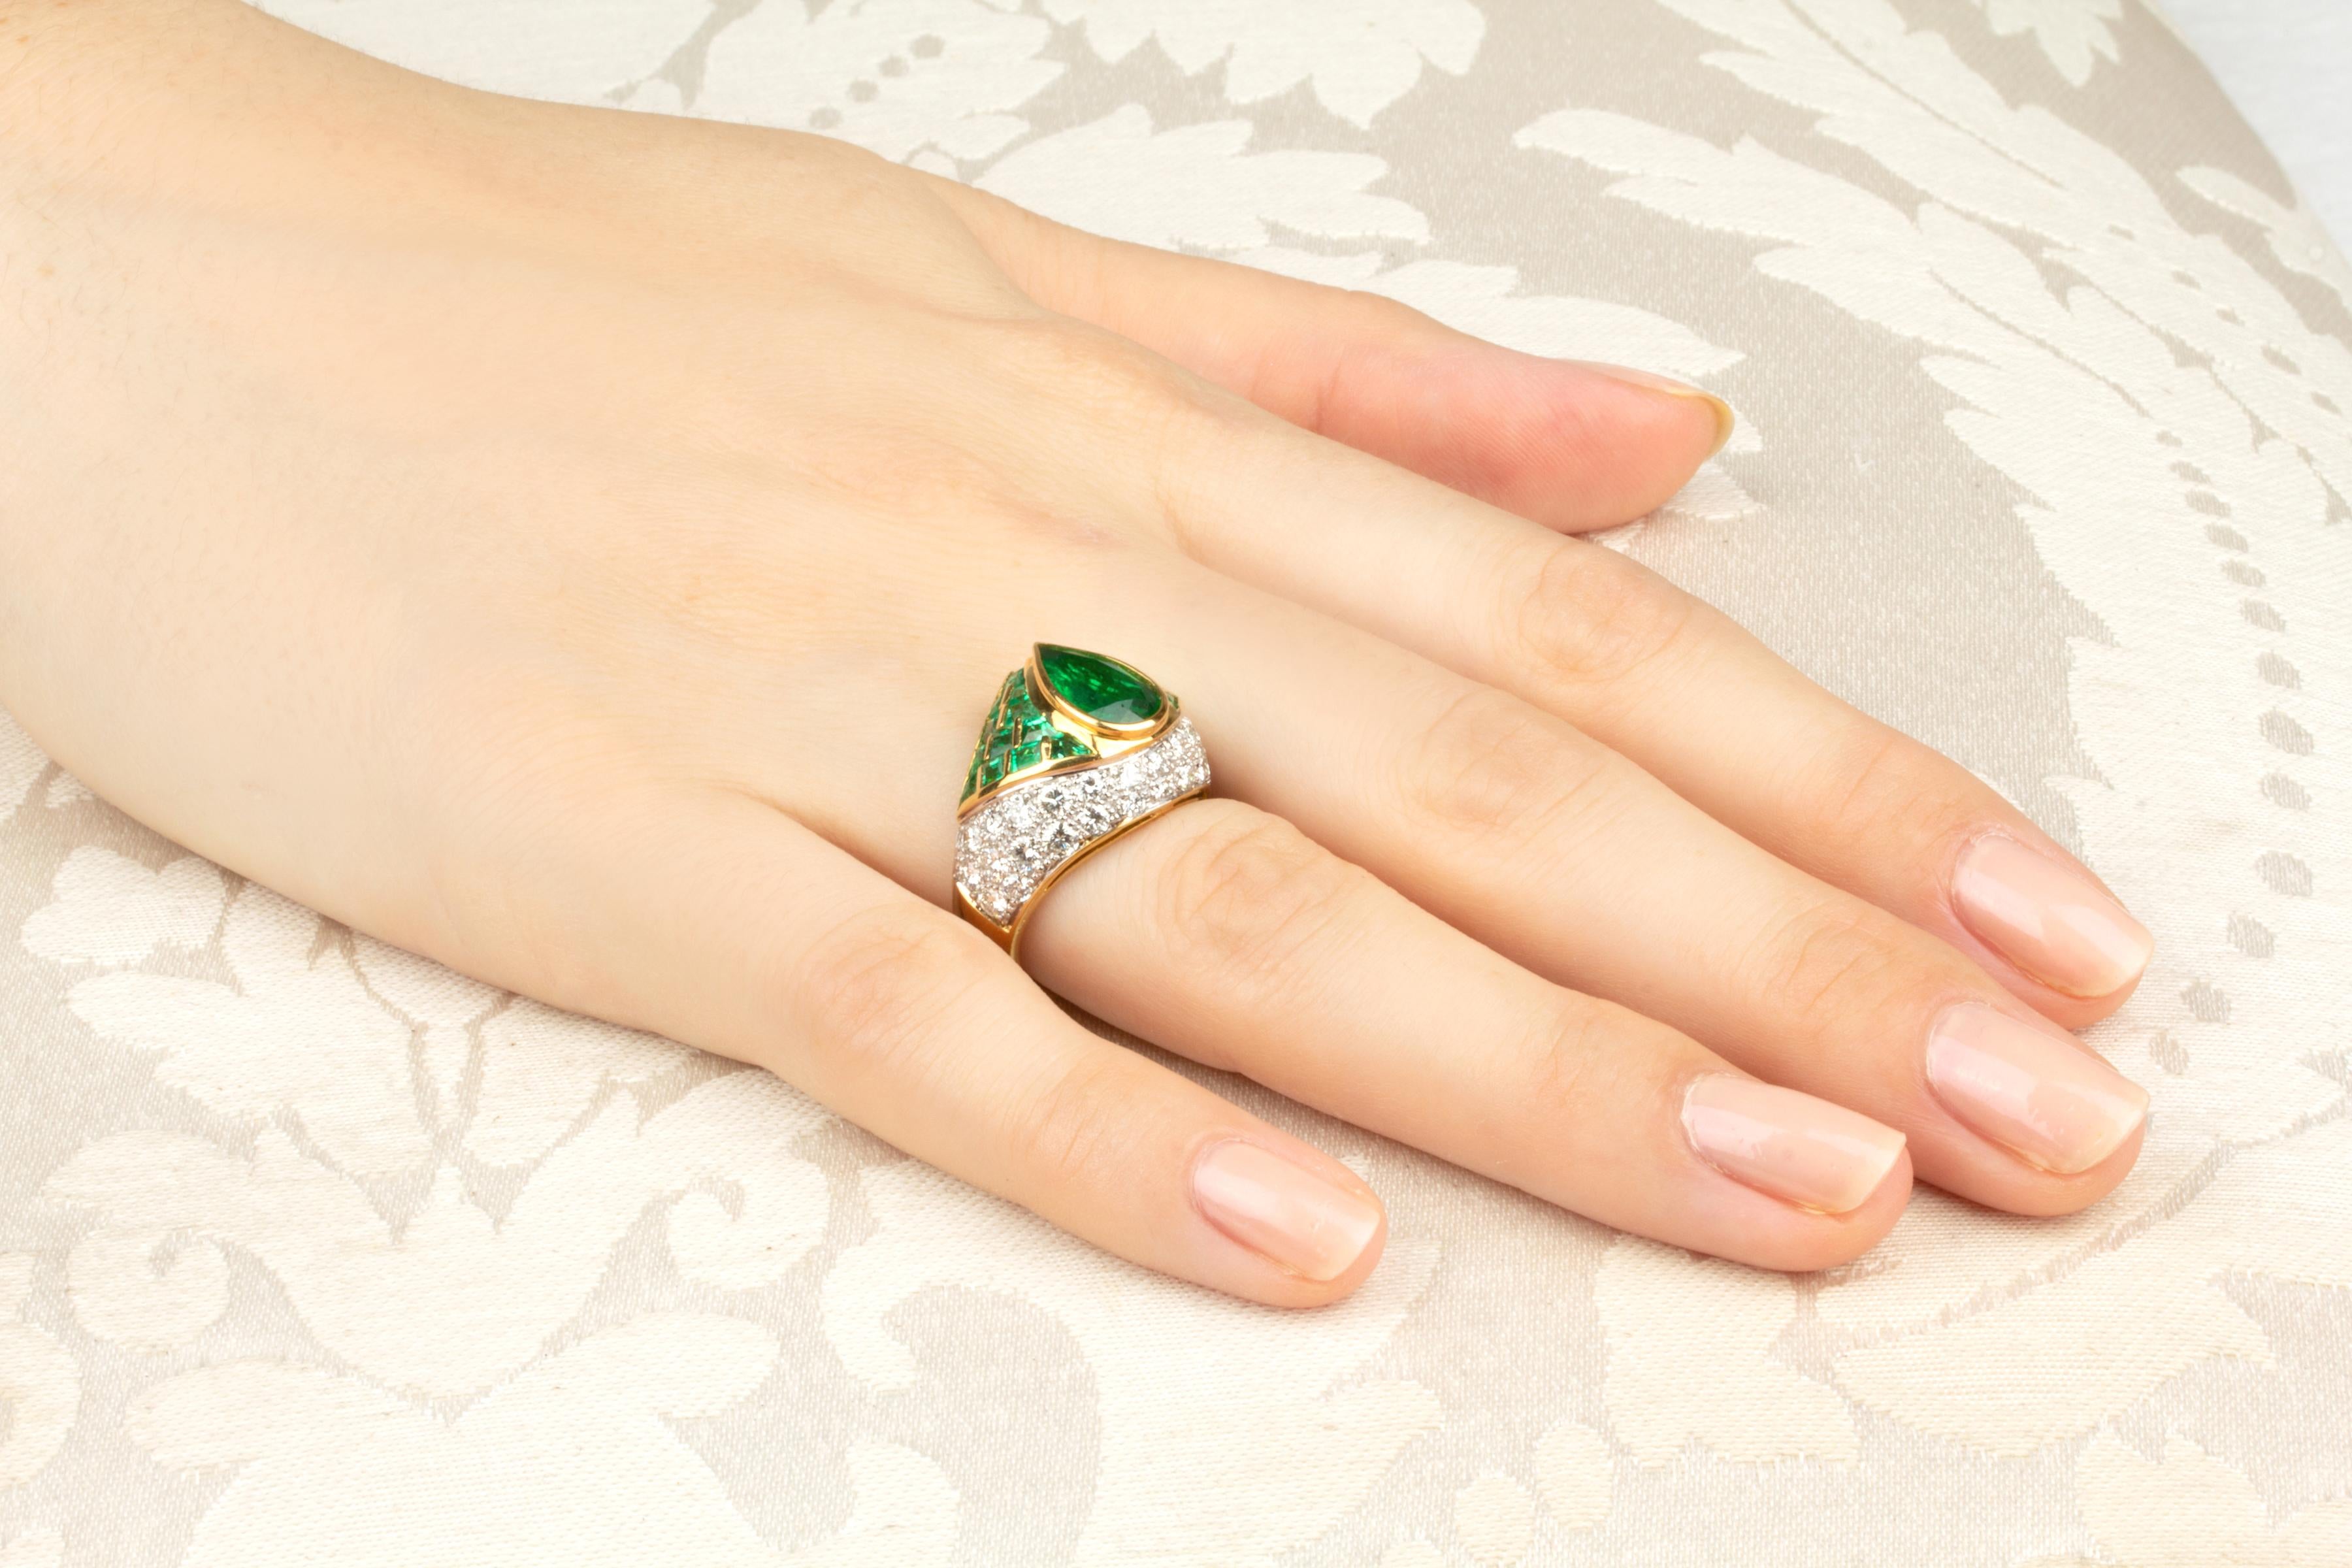 The ring features a drop shape faceted emerald of brilliant color (1.64 carats) flanked by a geometric pattern of custom cut square emeralds (2.43 carats). The design is complete with 1.75 carats of round diamonds of top quality set en pavé